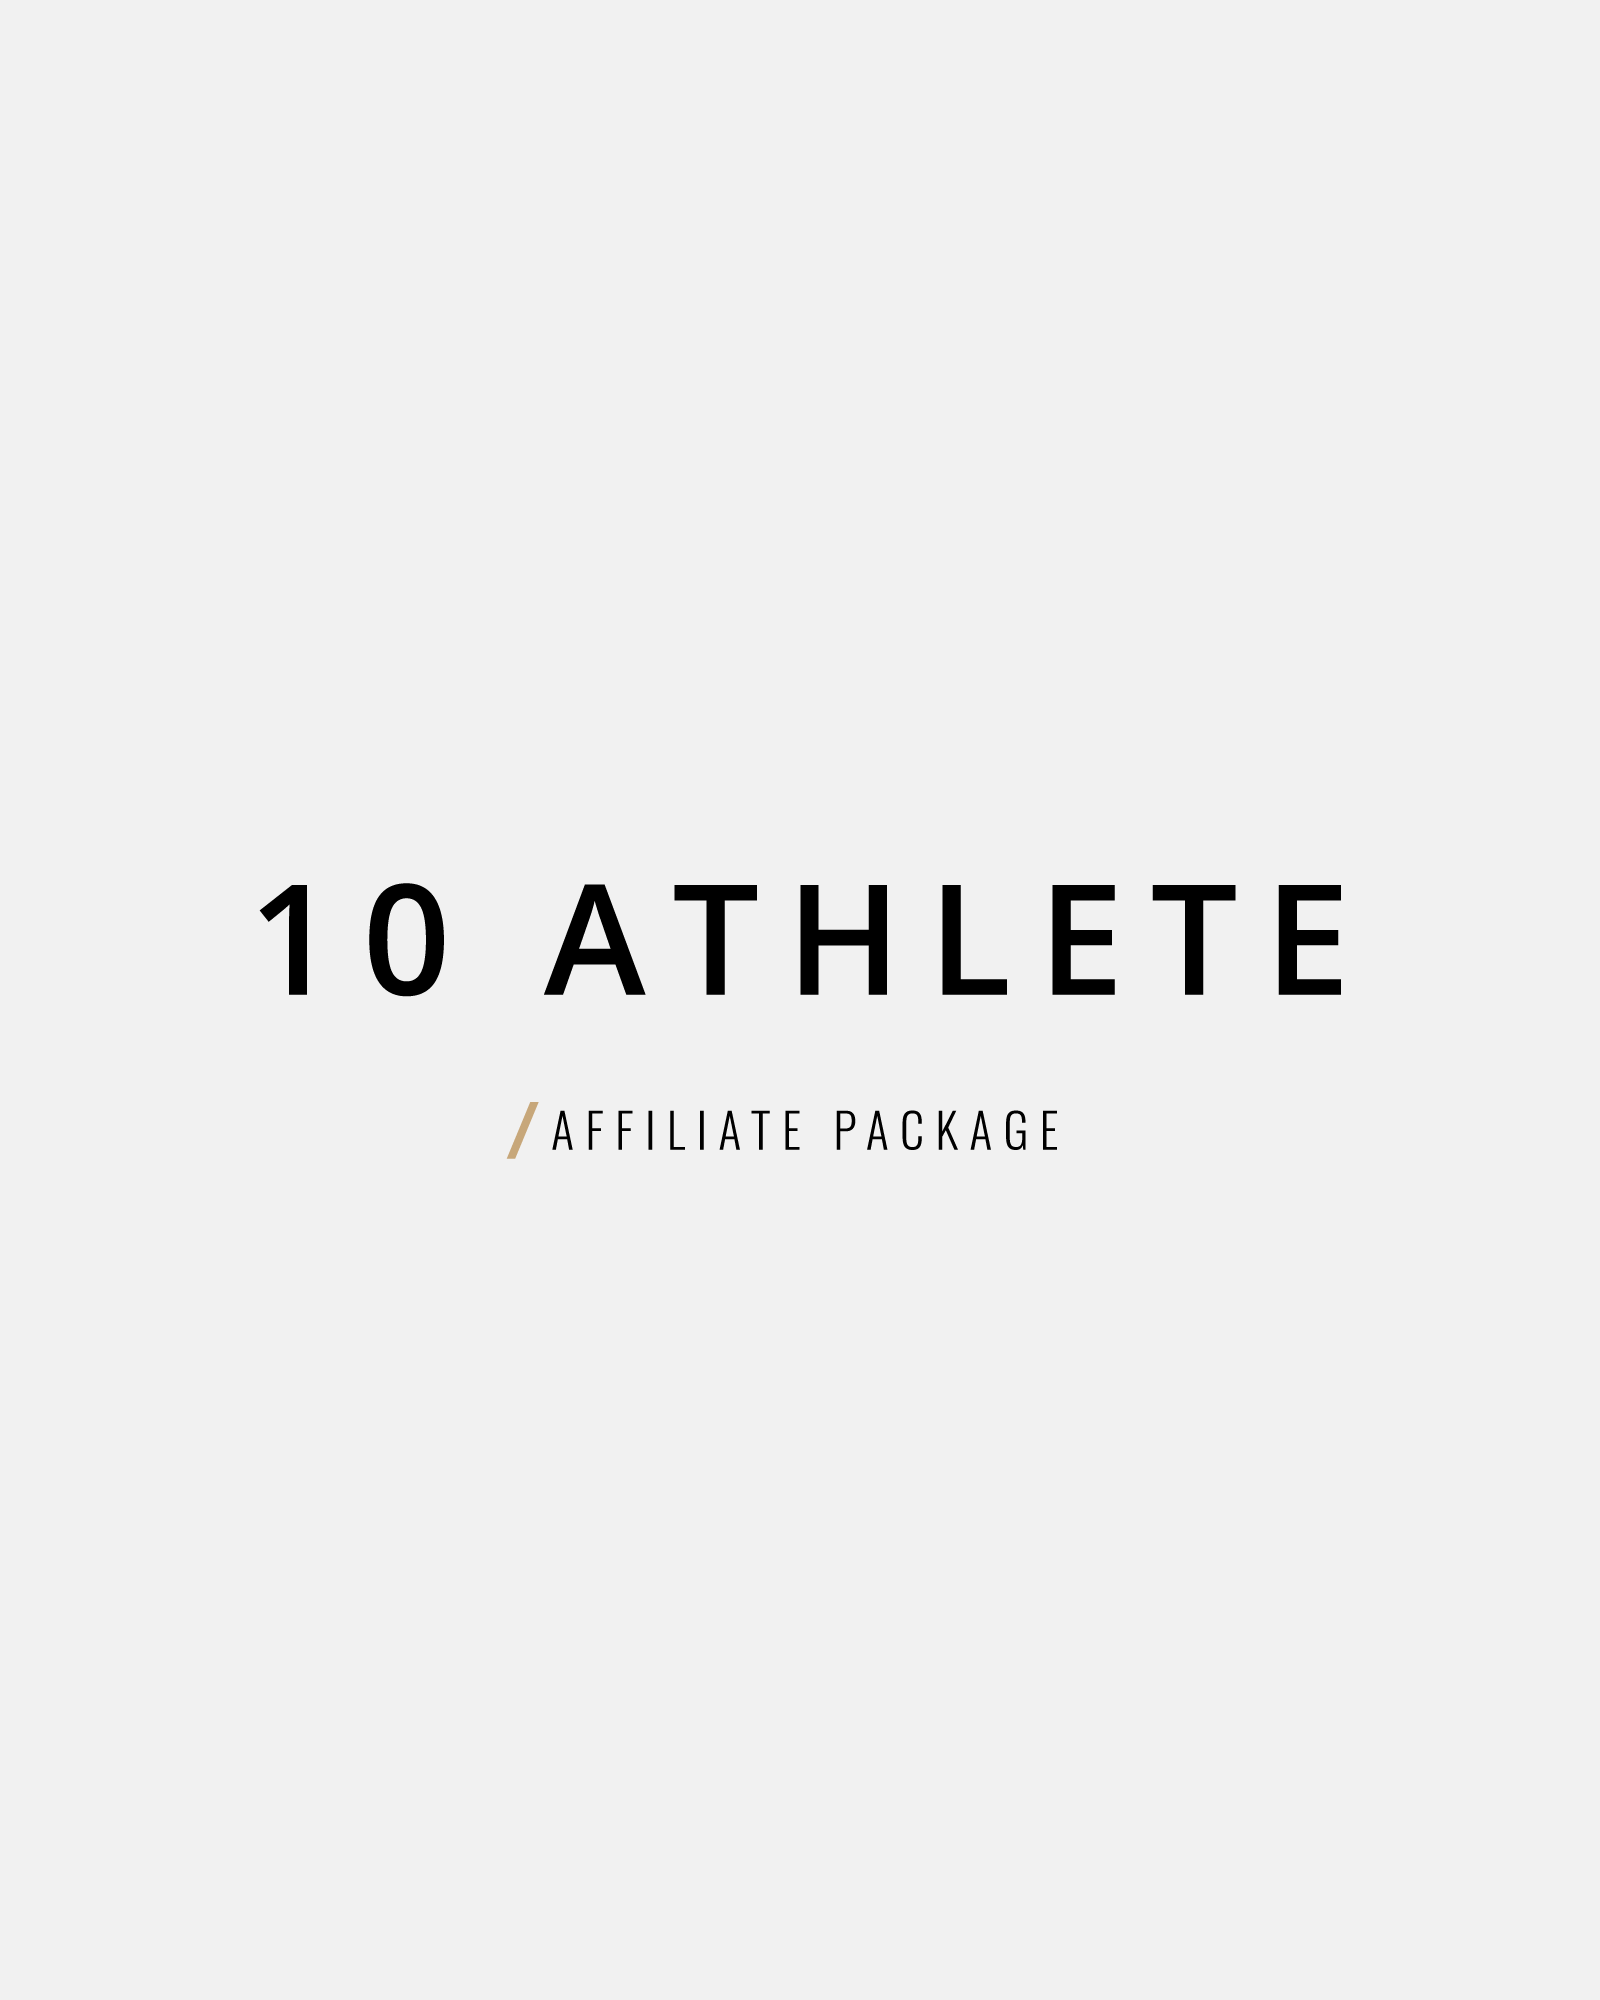 ten athlete affiliate gym package for crossfit gym